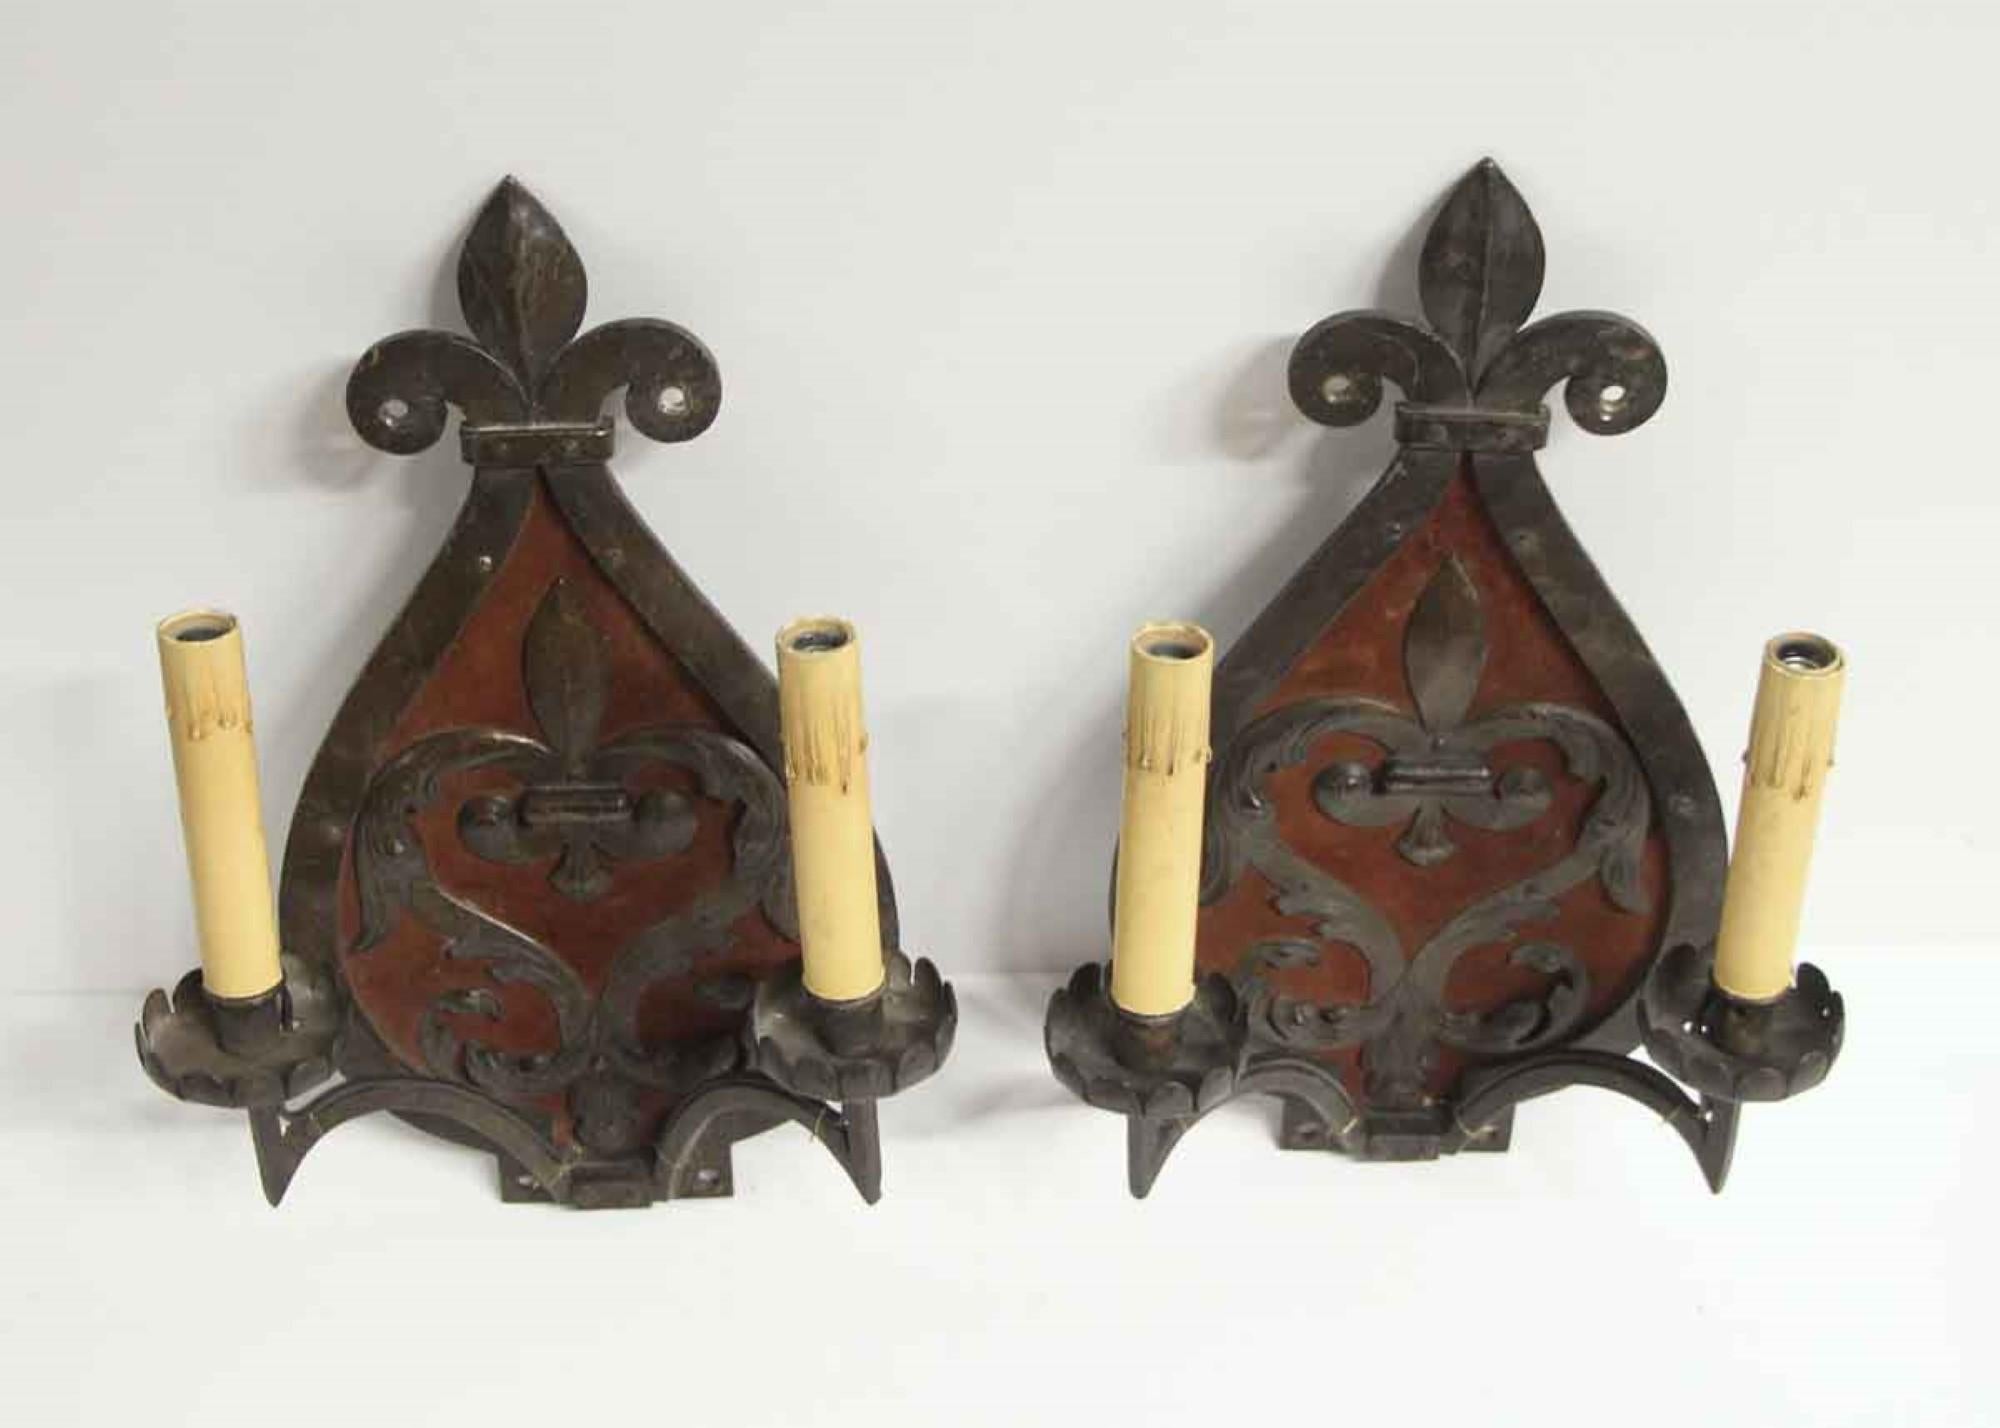 19th century French wrought iron double arm sconces with a deep red fabric center. Hammered and riveted detail decorates this unique pair. Price includes restoration. Priced as a pair. This can be seen at our 400 Gilligan St location in Scranton, PA.